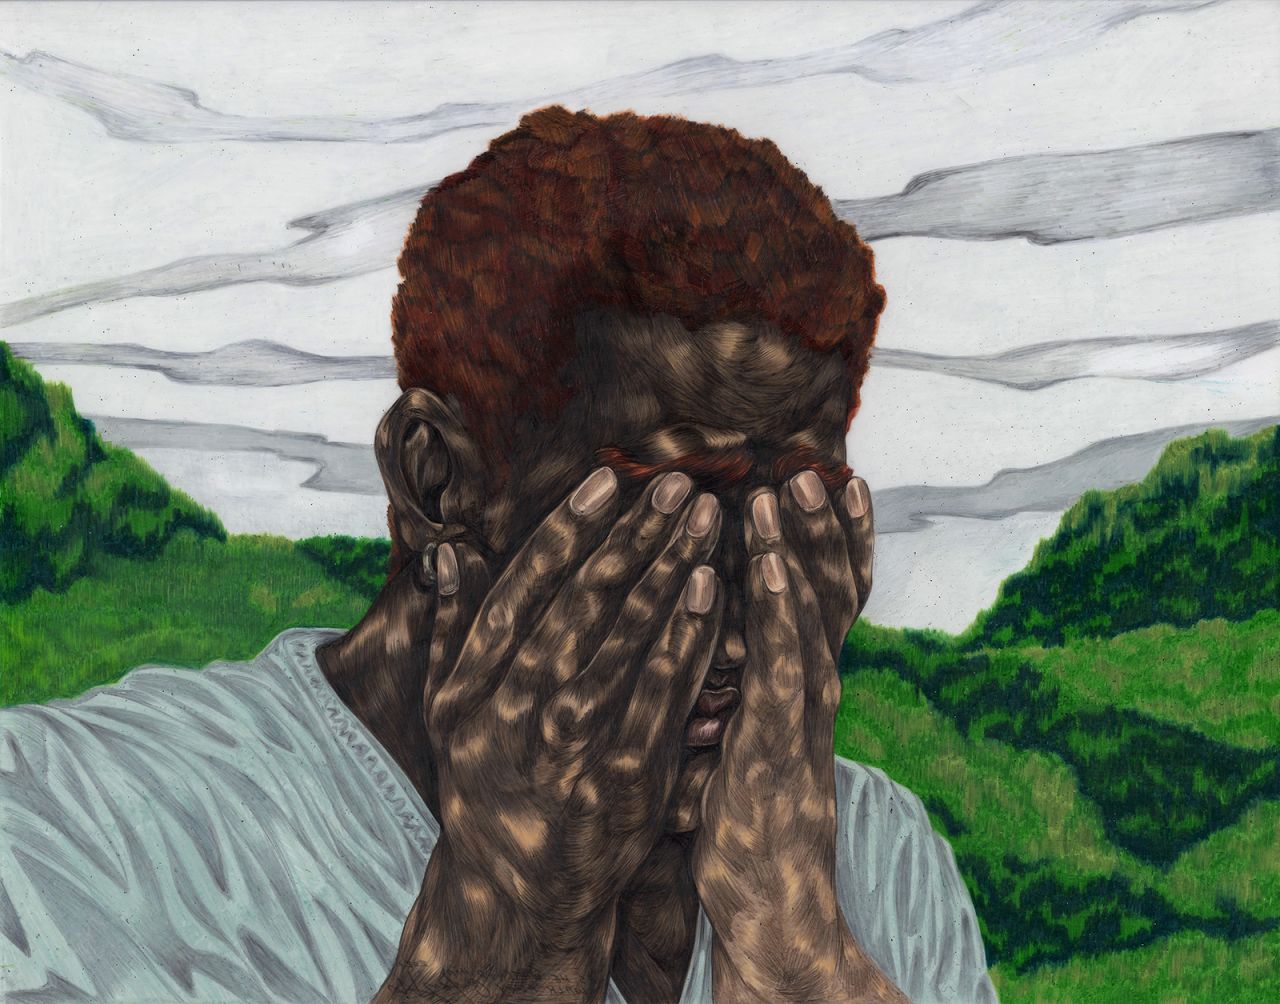 Ojih Odutola is exhibiting new work, made during lockdown, at a virtual show for New York's Jack Shainman Gallery.